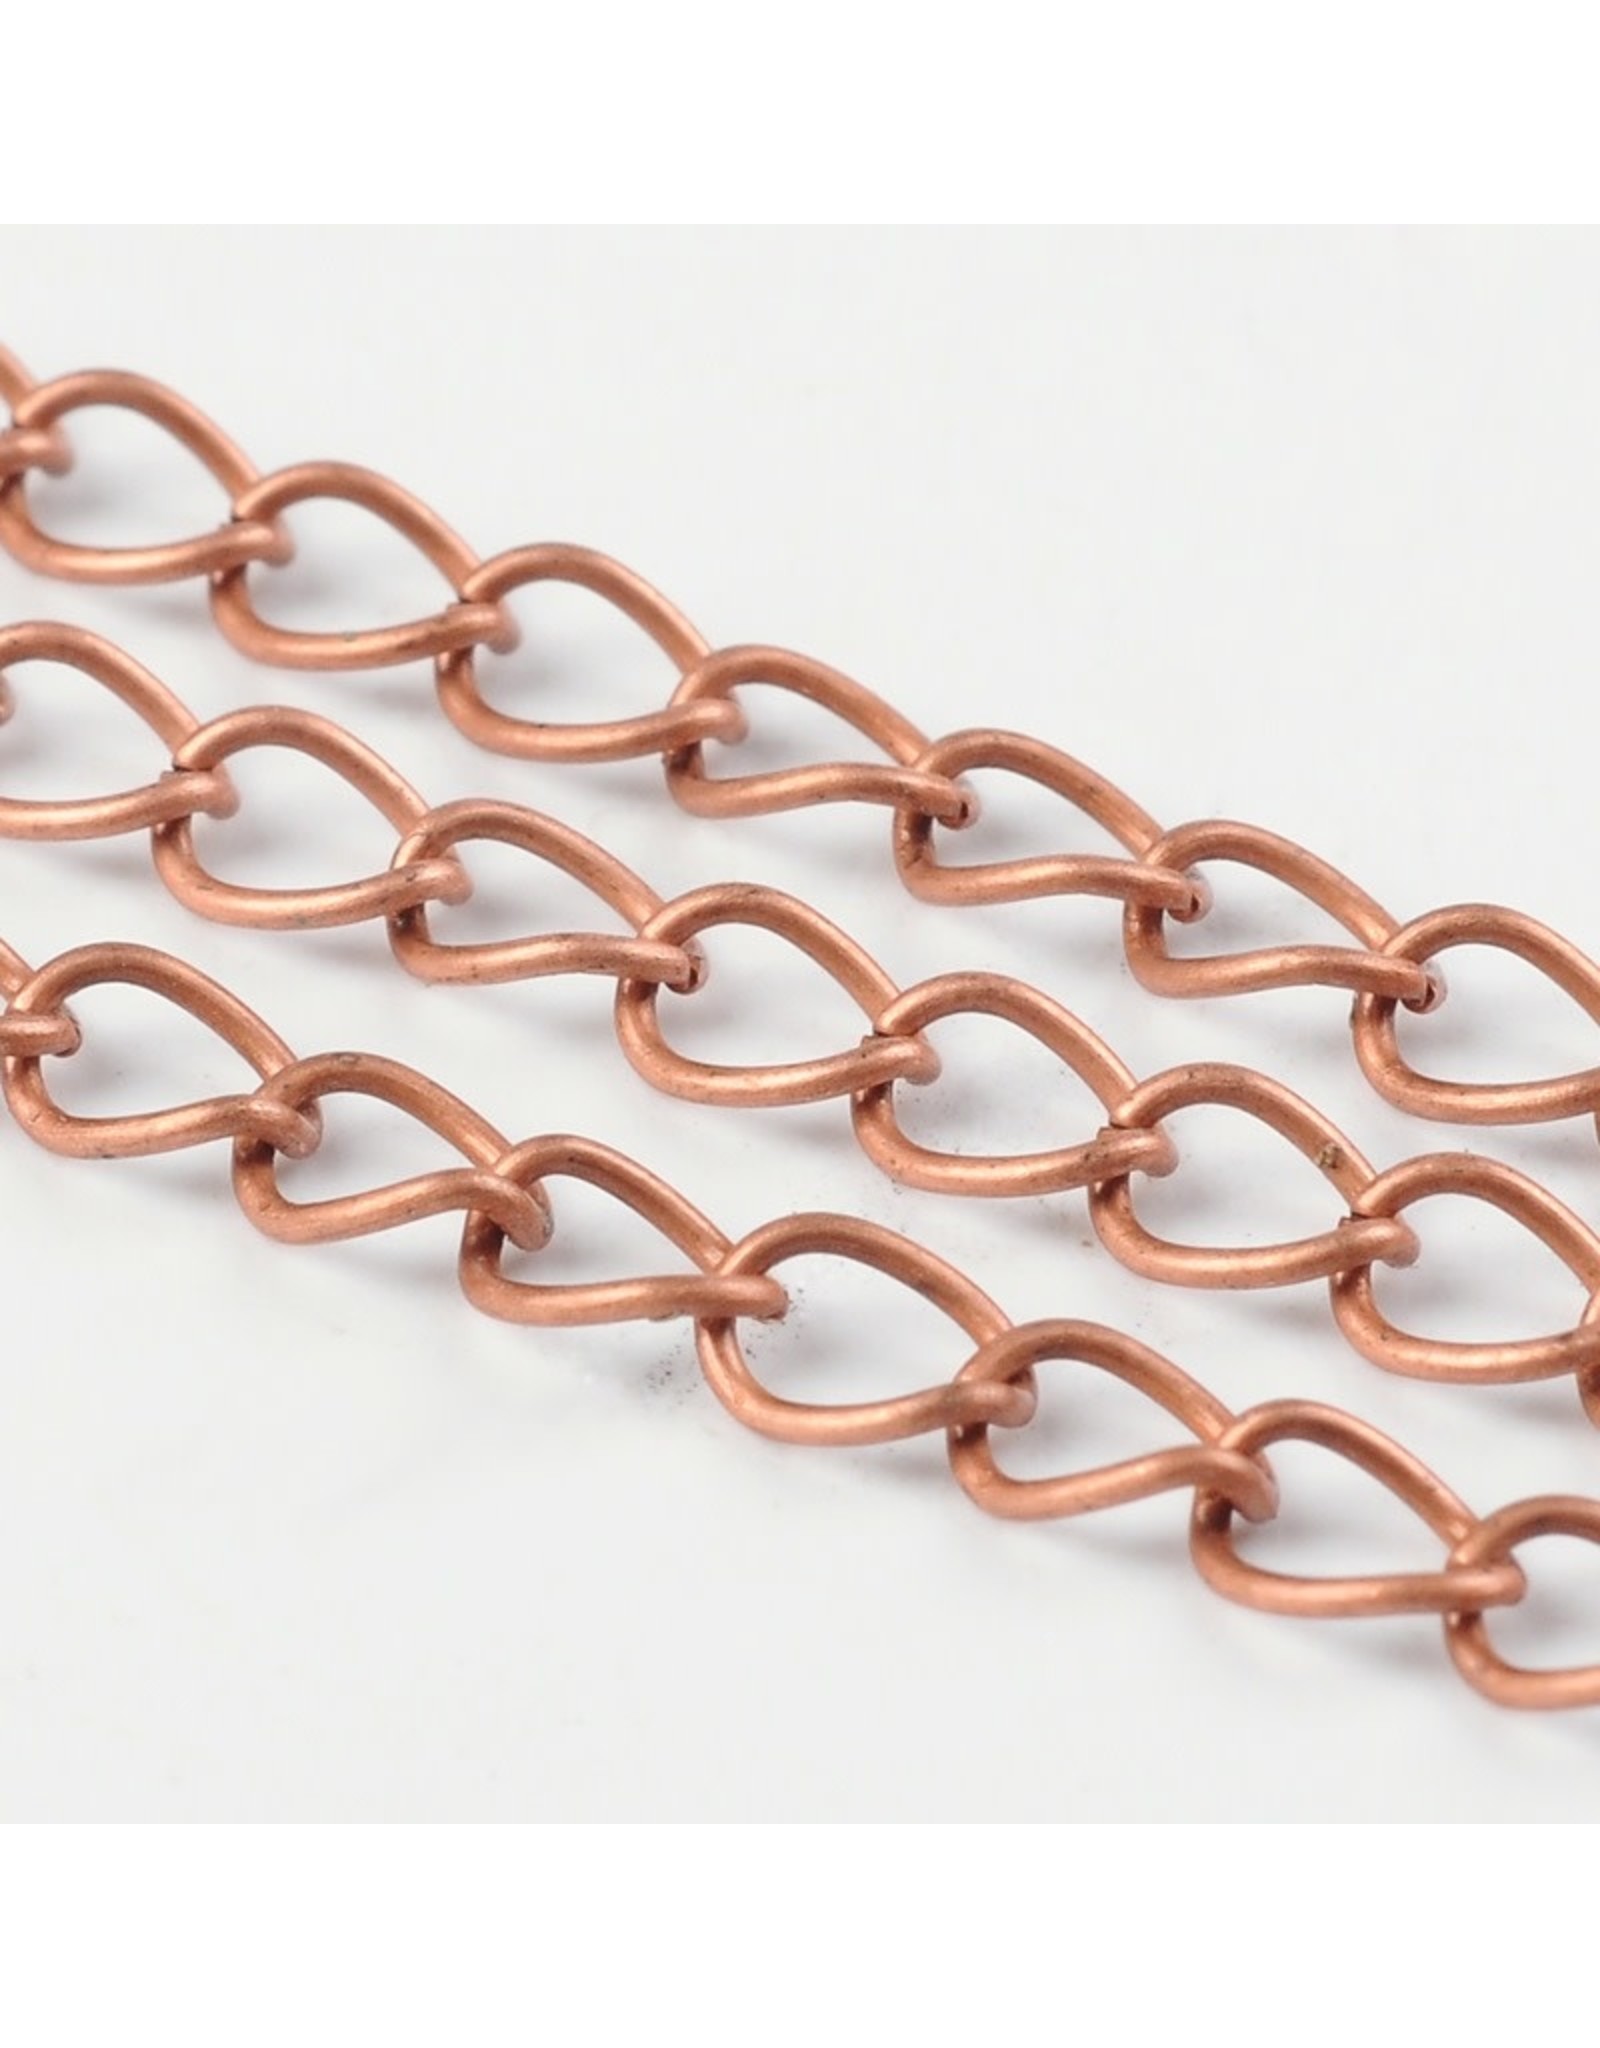 #15 Curb Chain Twisted 6x3mm Antique Copper 1 Foot  NF